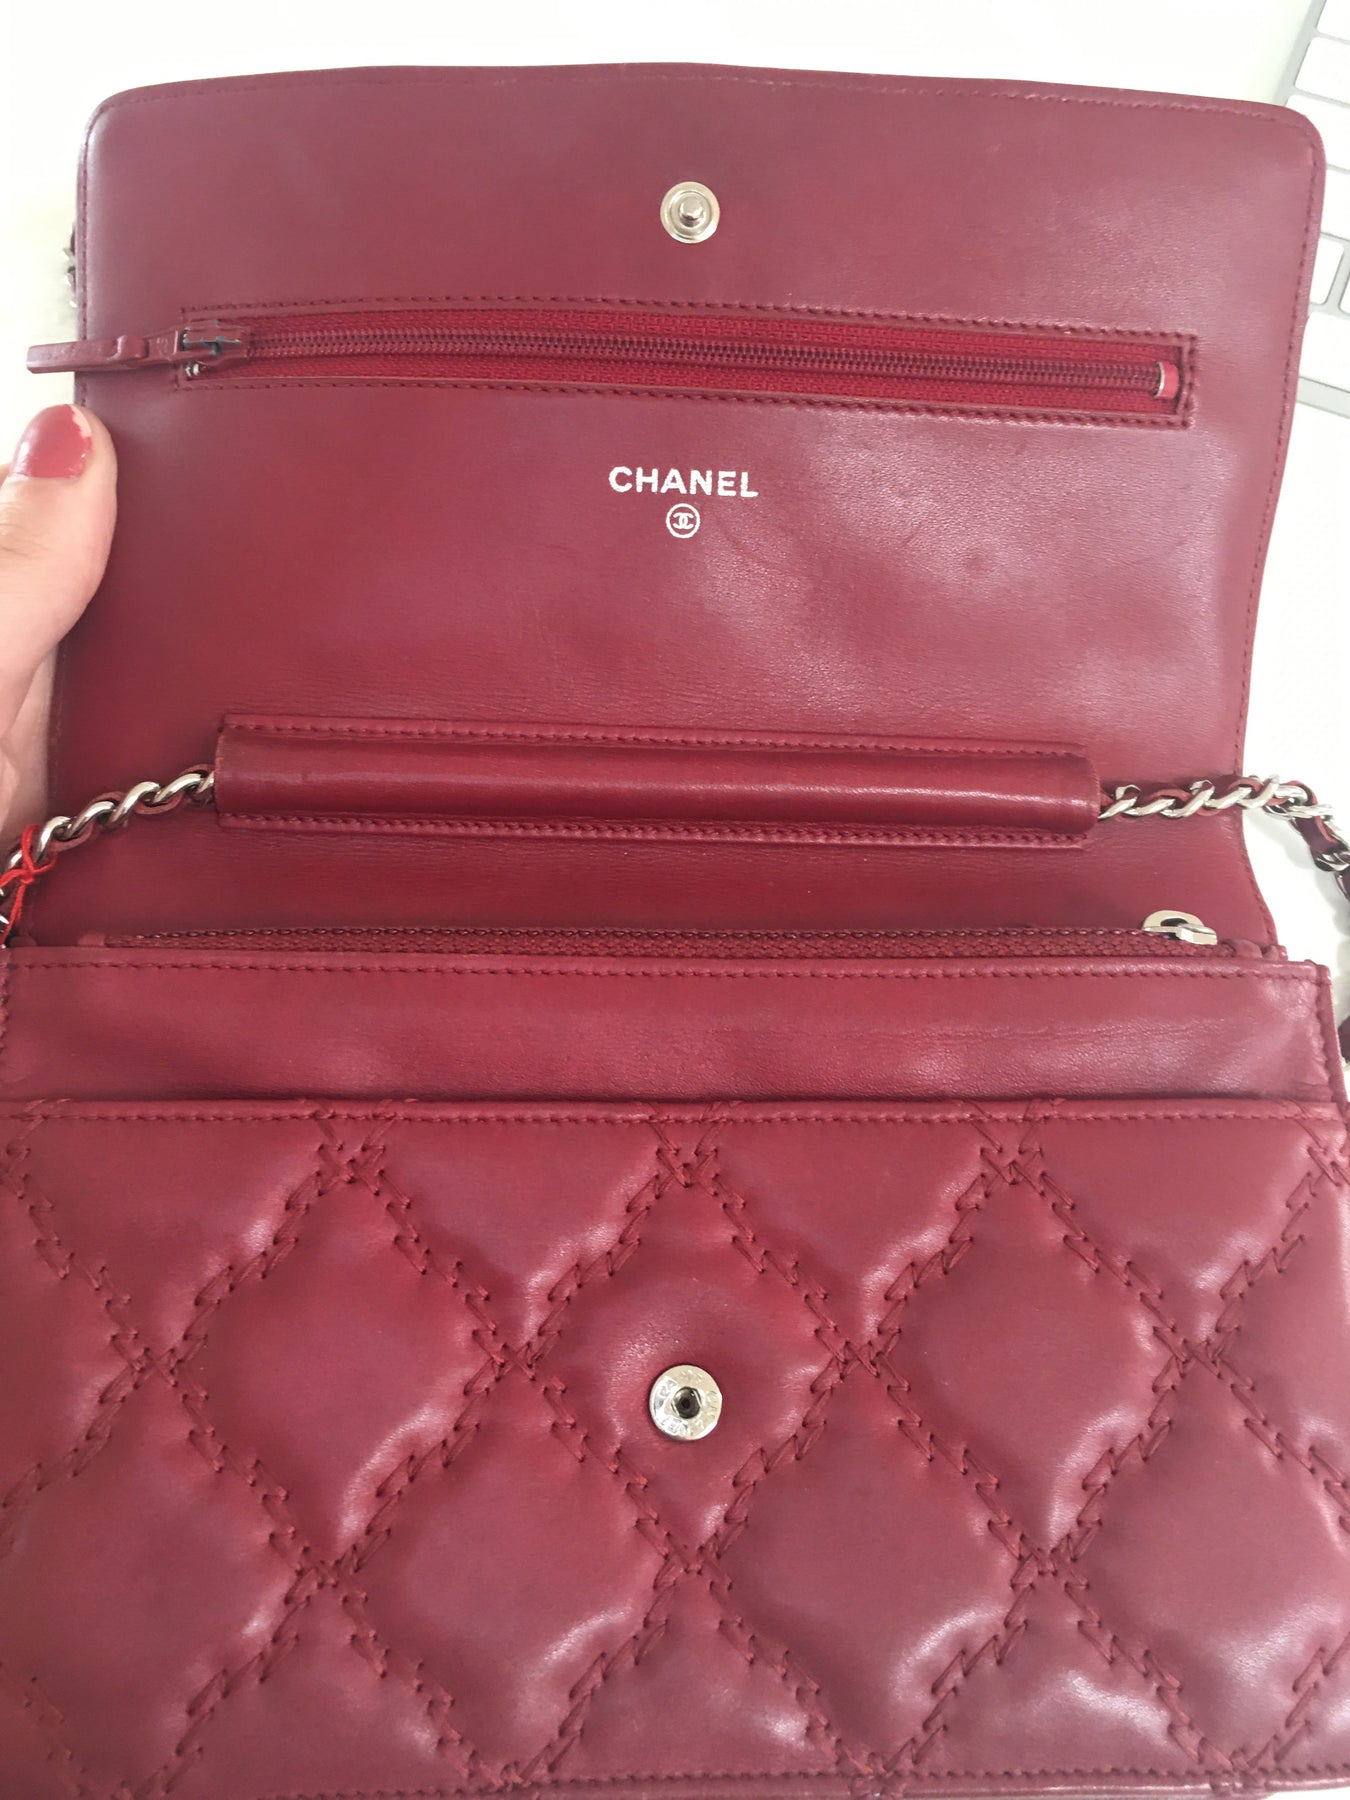 CHANEL Caviar Leather Exterior Crossbody Bags & Handbags for Women for sale